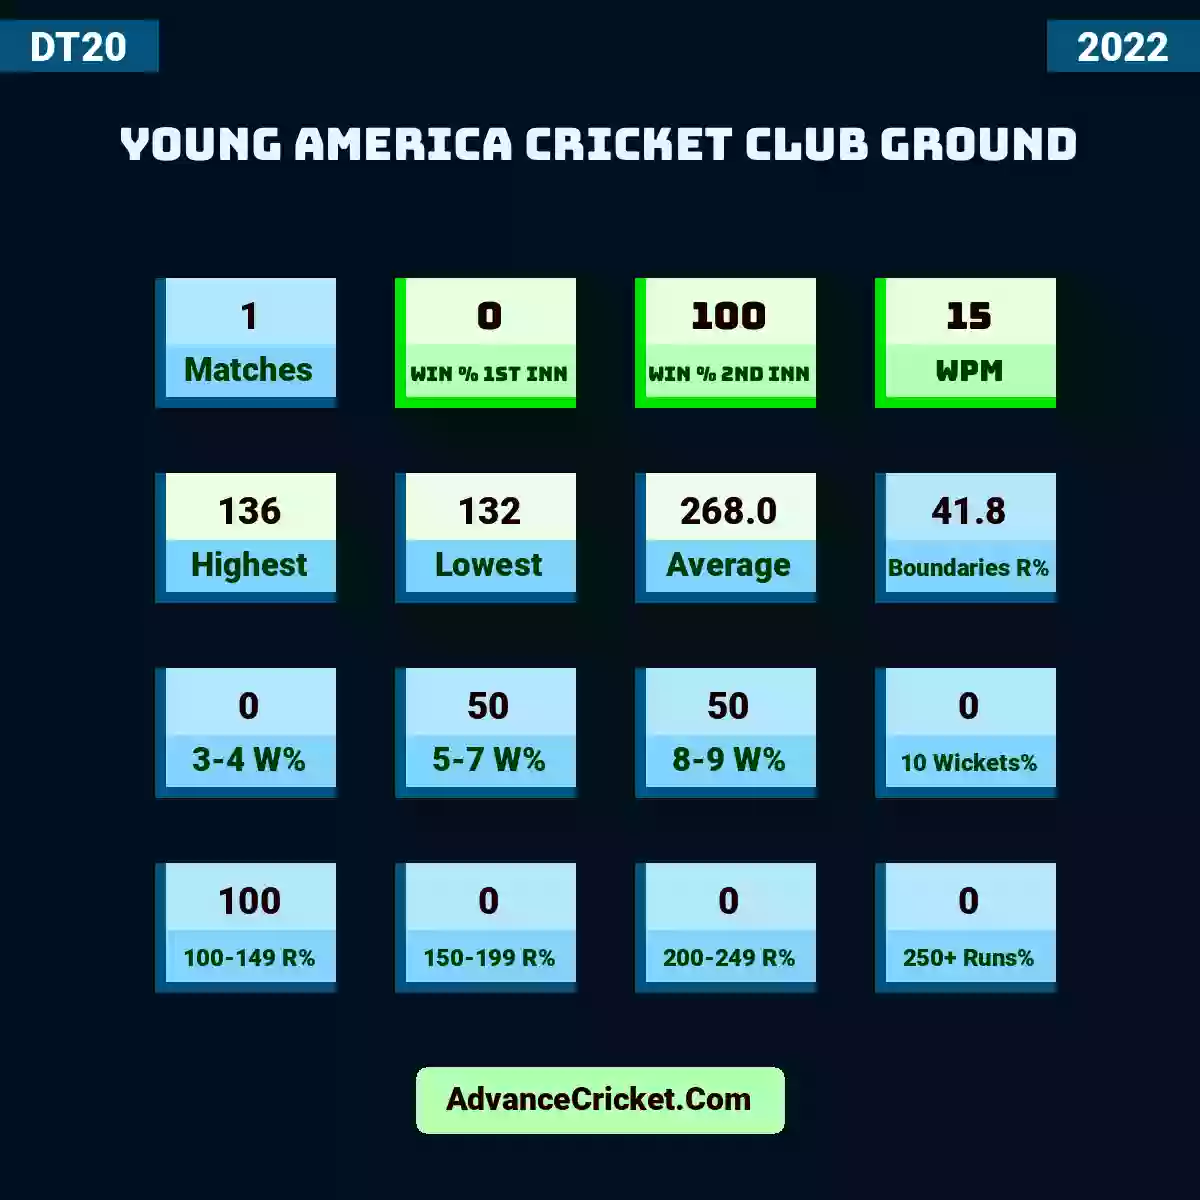 Image showing Young America Cricket Club Ground with Matches: 1, Win % 1st Inn: 0, Win % 2nd Inn: 100, WPM: 15, Highest: 136, Lowest: 132, Average: 268.0, Boundaries R%: 41.8, 3-4 W%: 0, 5-7 W%: 50, 8-9 W%: 50, 10 Wickets%: 0, 100-149 R%: 100, 150-199 R%: 0, 200-249 R%: 0, 250+ Runs%: 0.